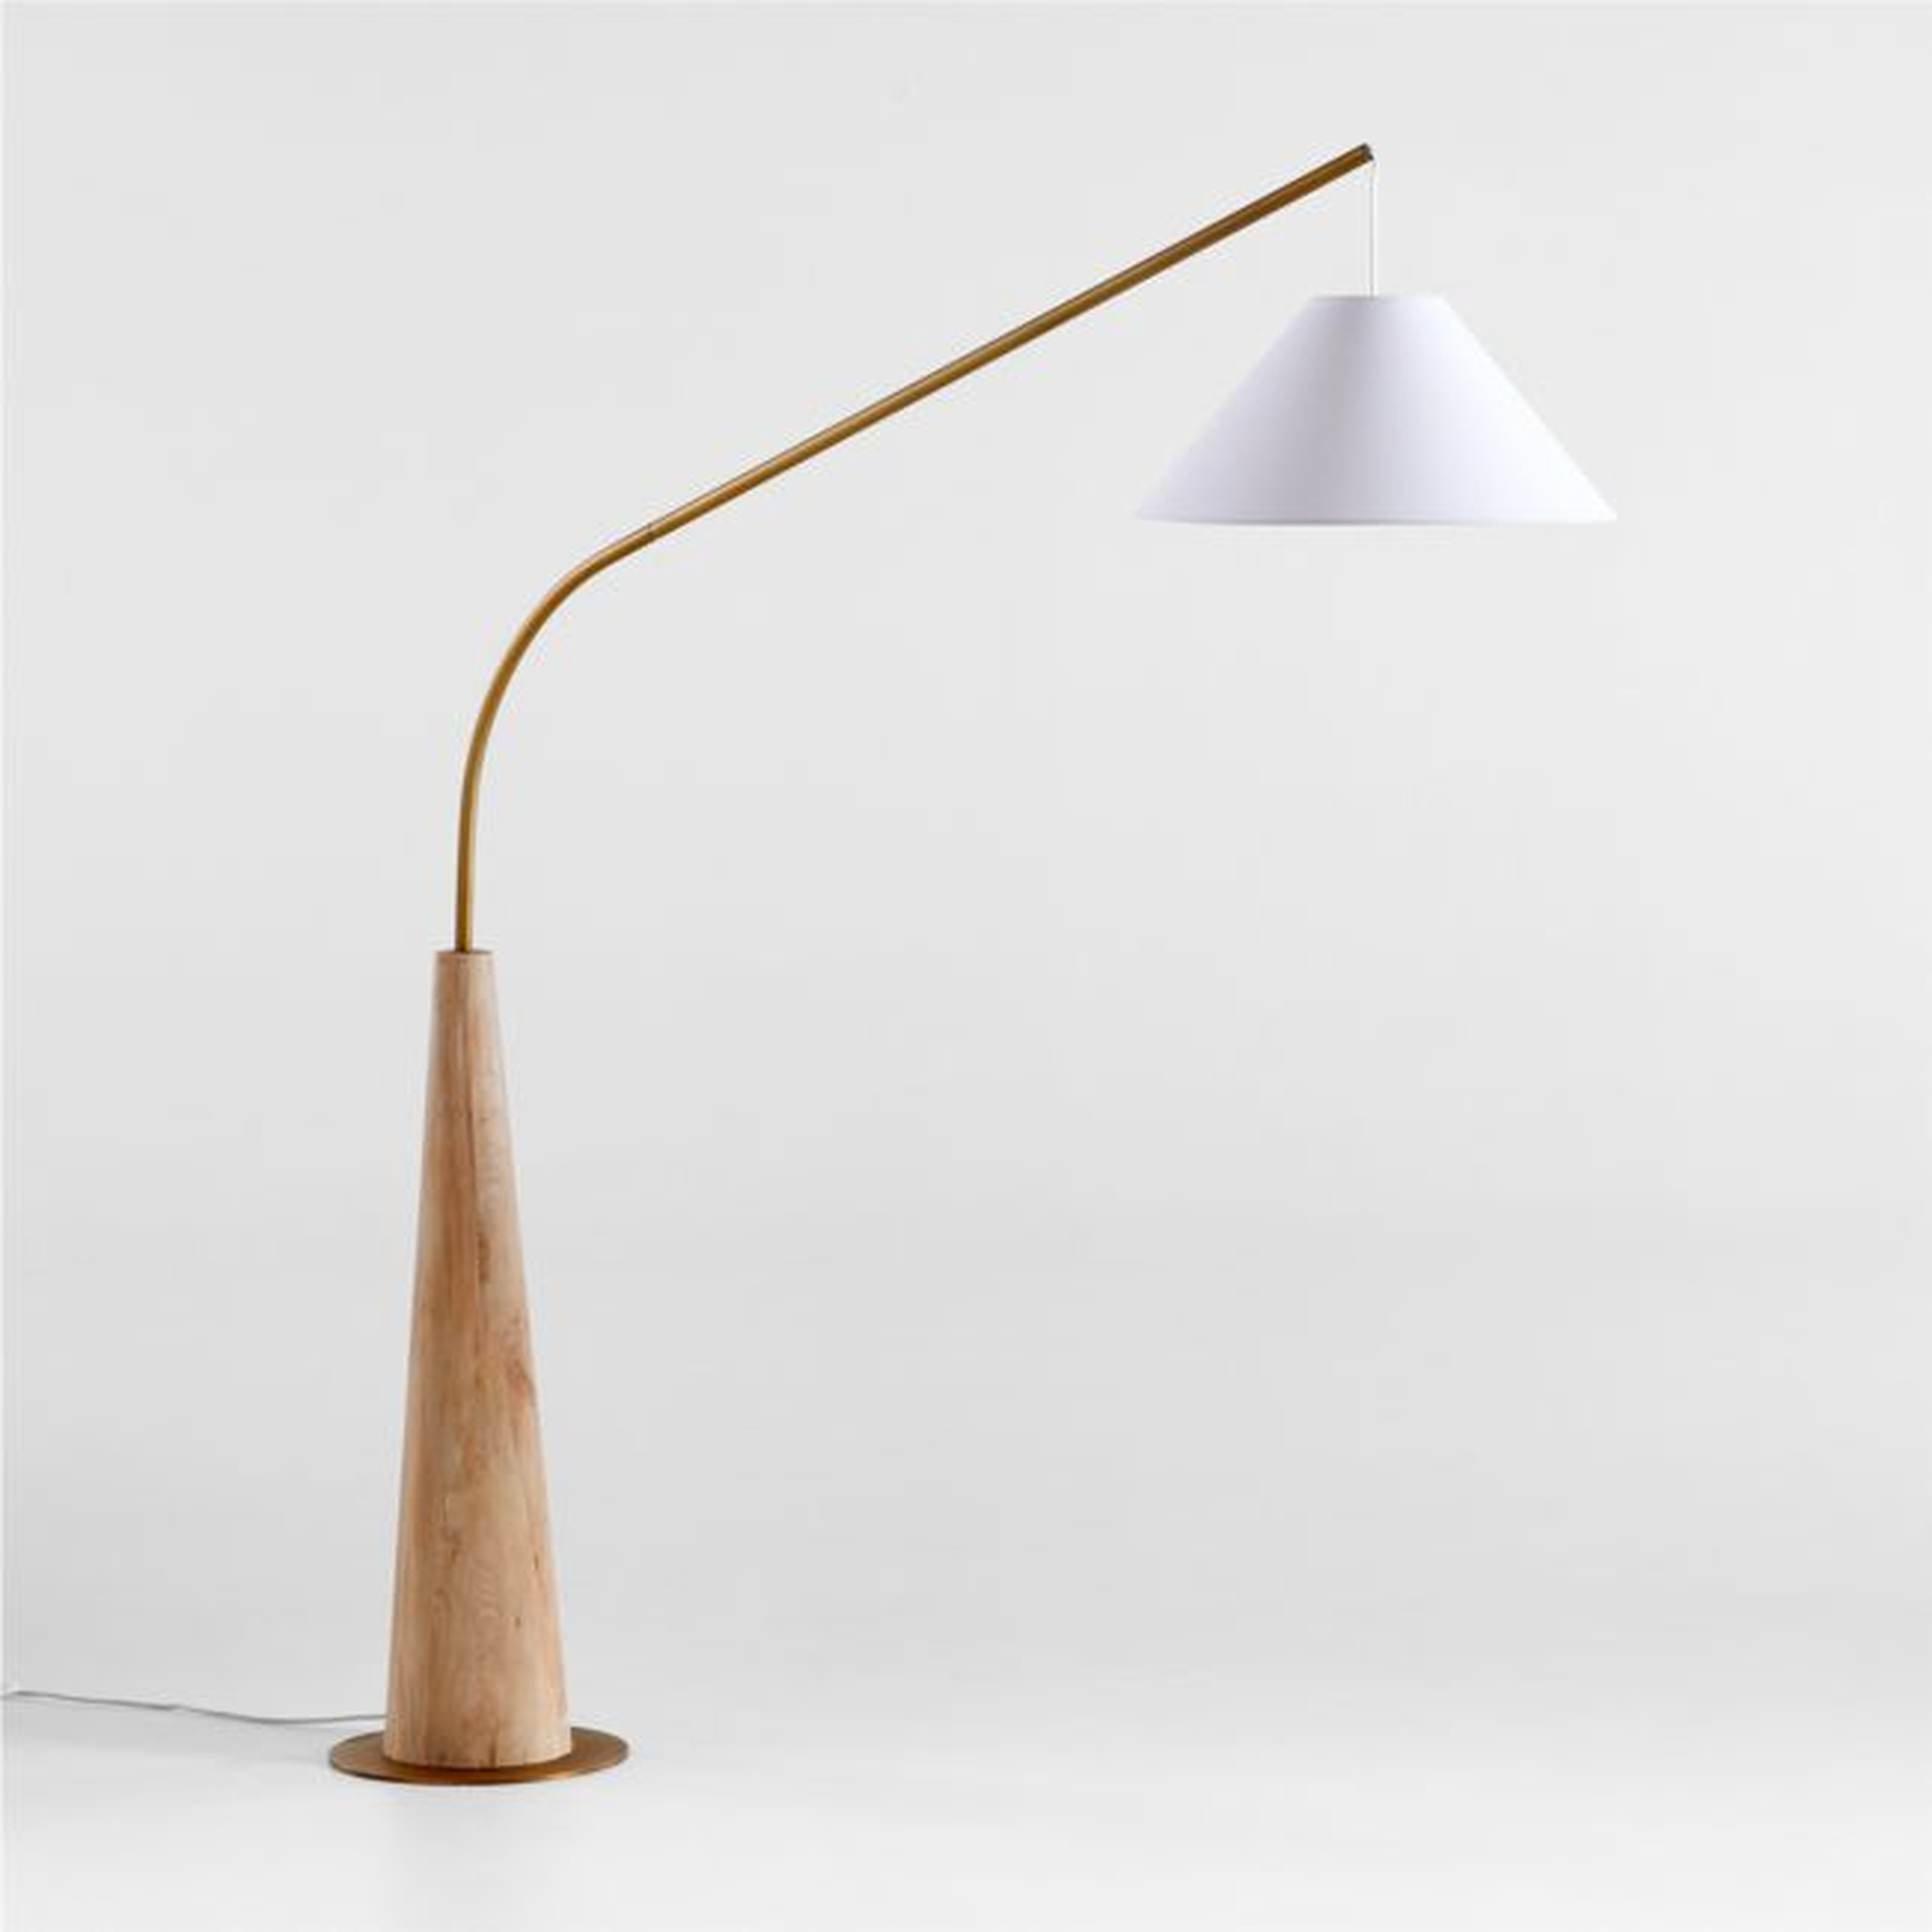 Gibson Wood Hanging Arc Floor Lamp with White Shade - Crate and Barrel